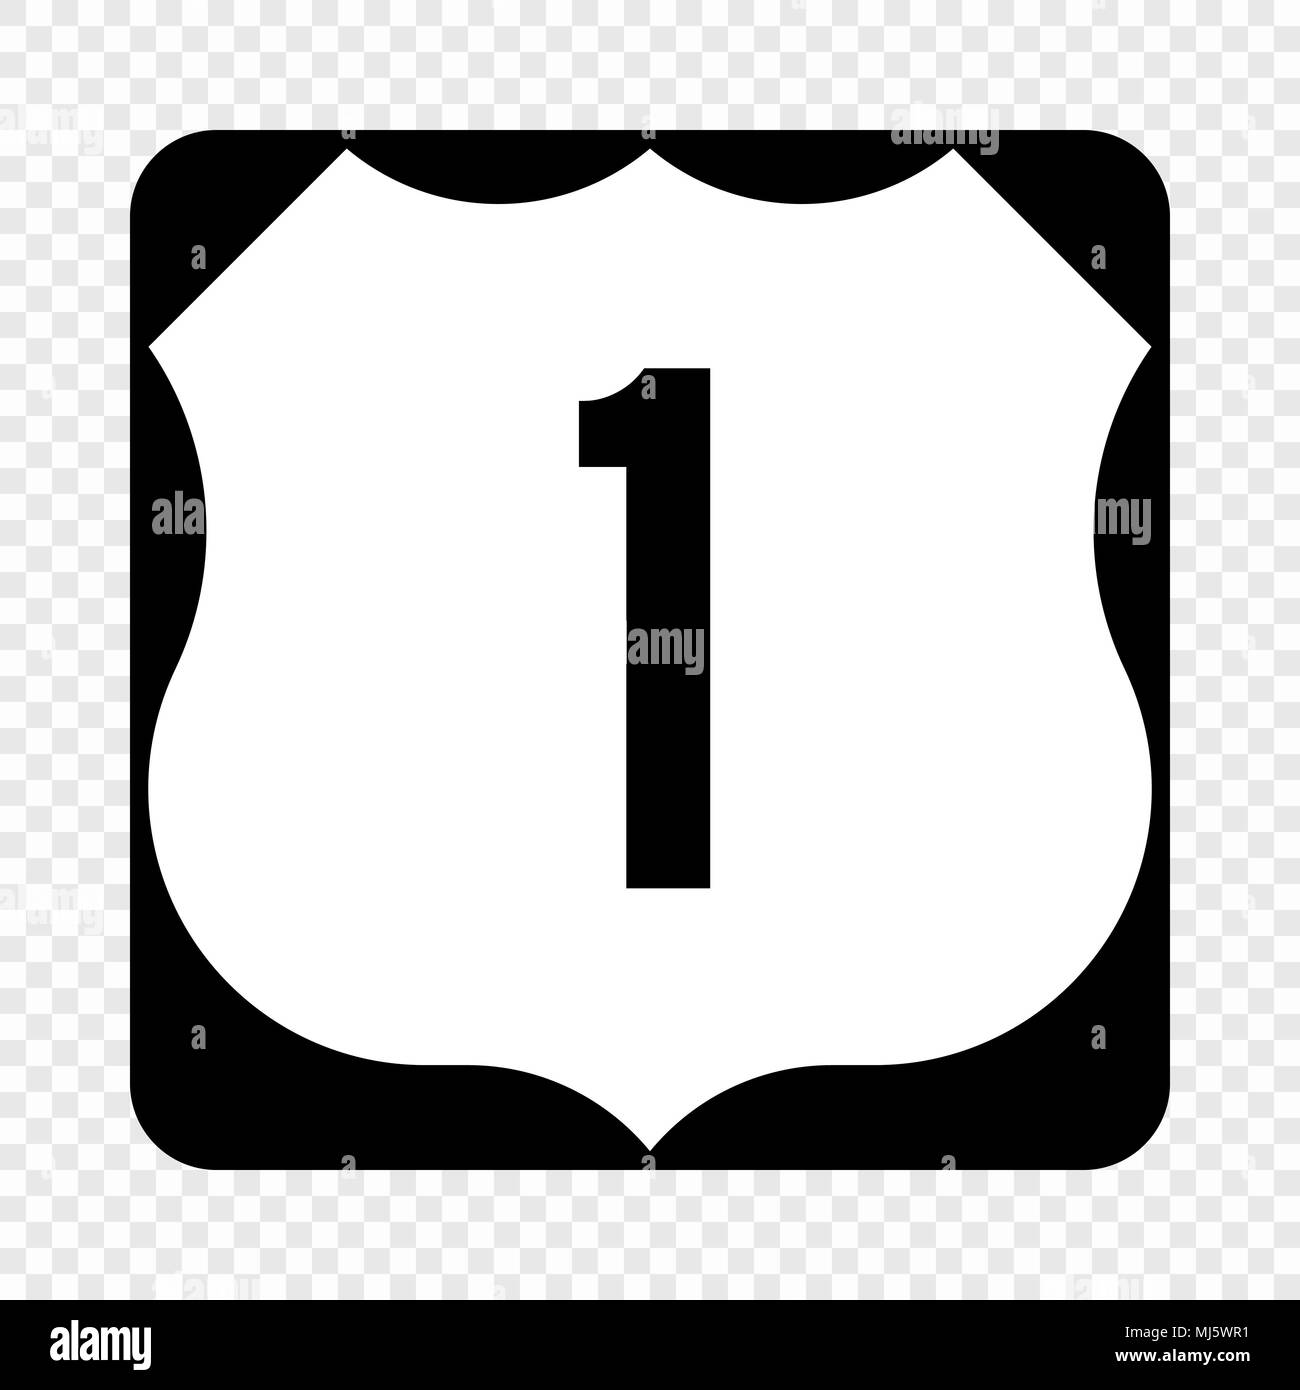 United States Highway shield Stock Vector